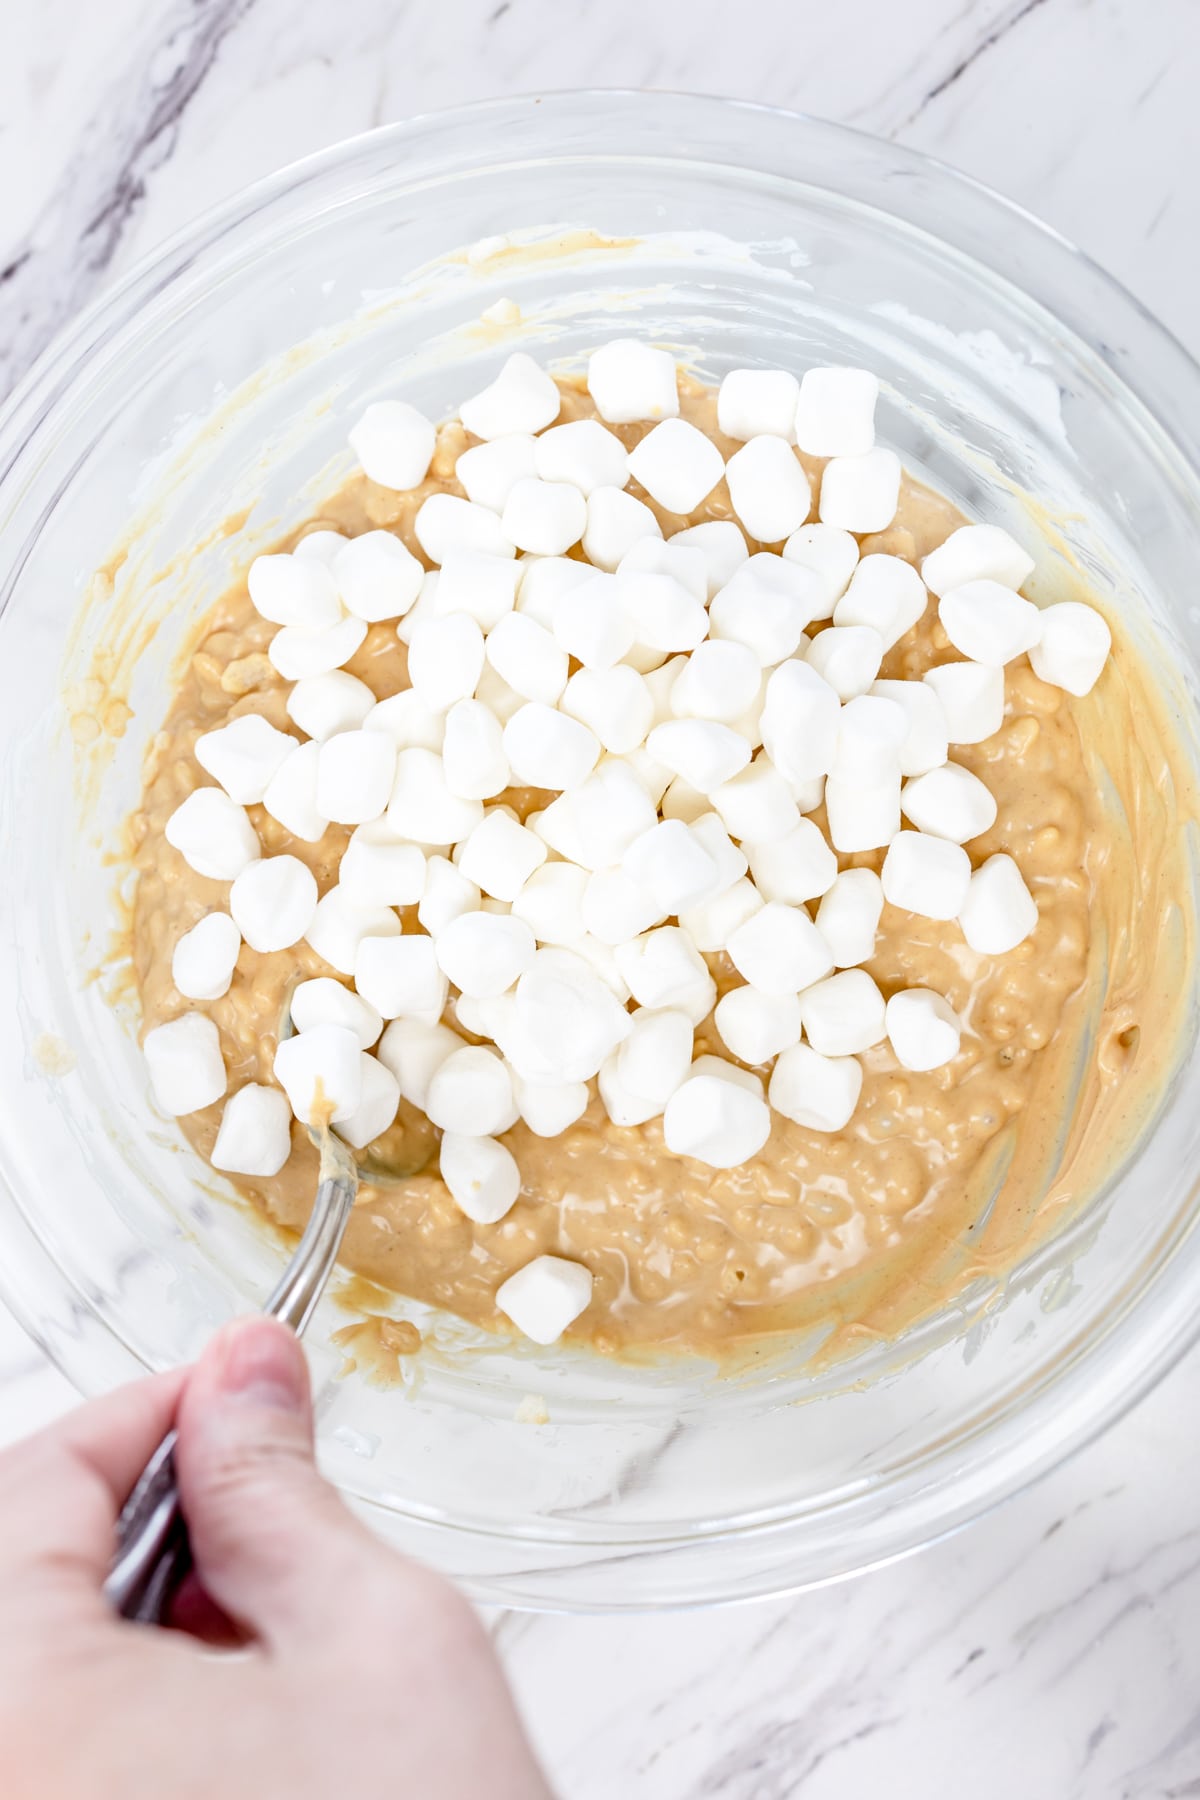 Top view of glass mixing bowl with Rice Krispie mixture in it and mini marshmallows on top.